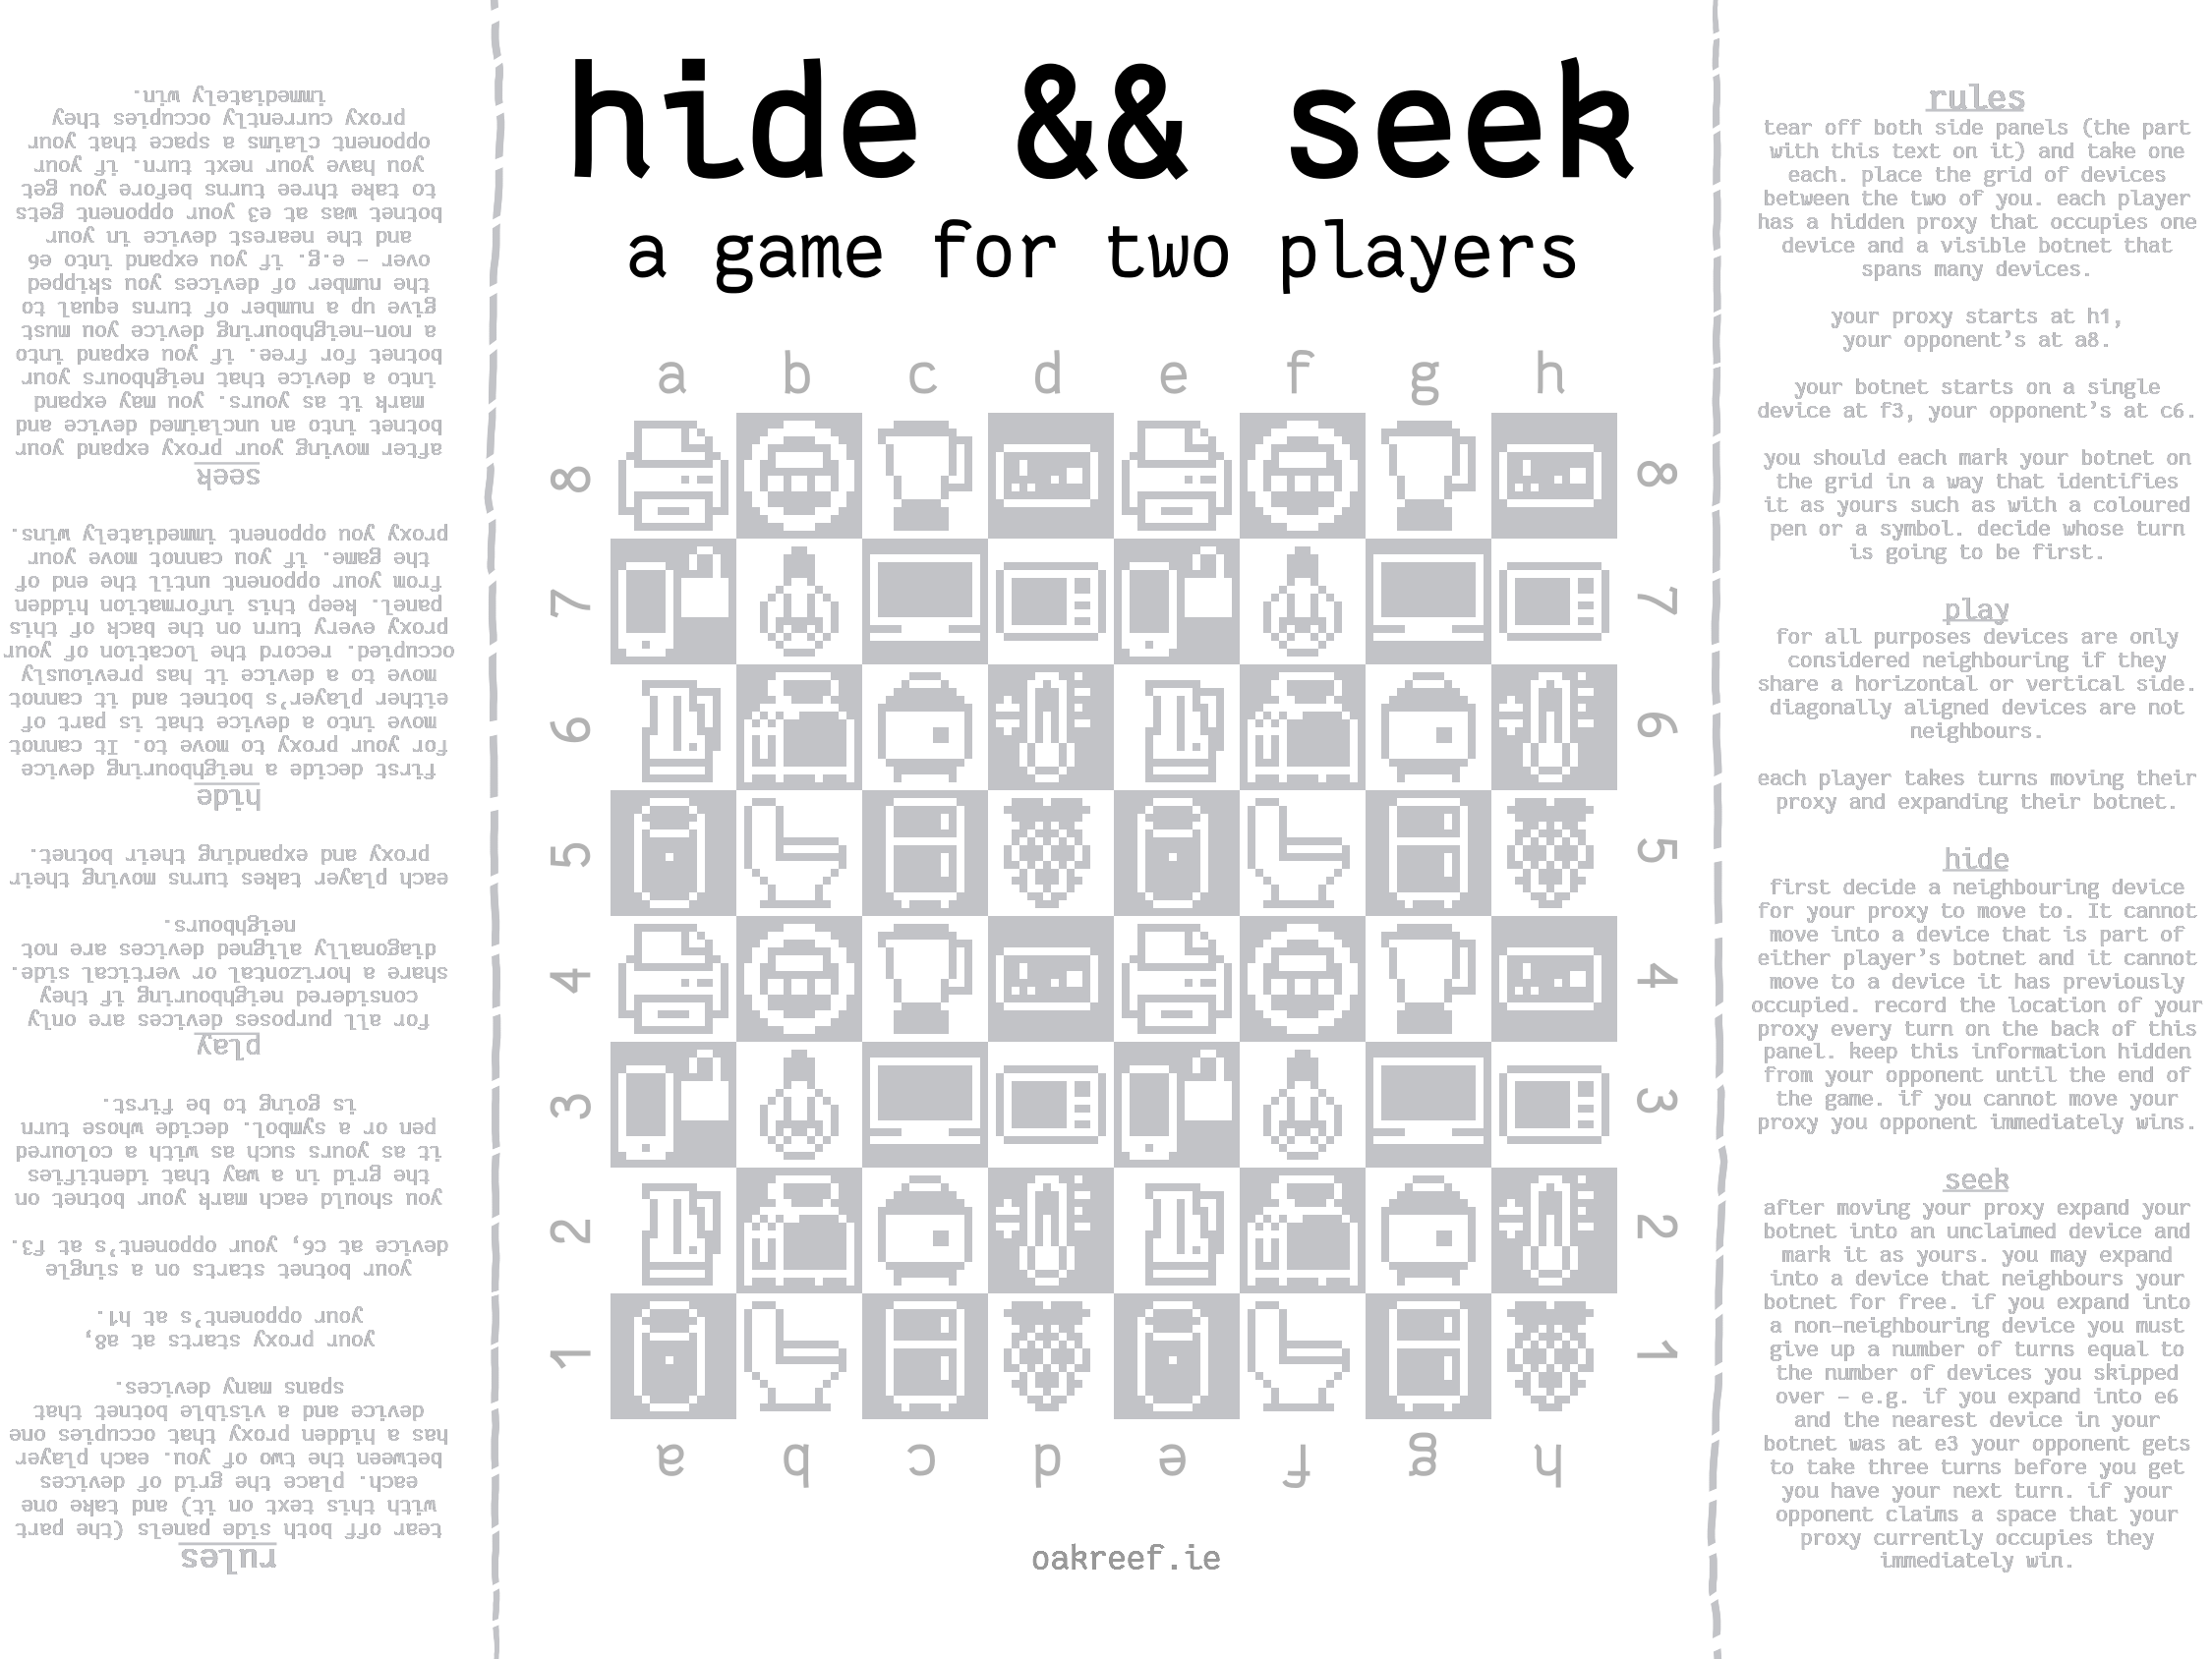 The front of the game sheet.